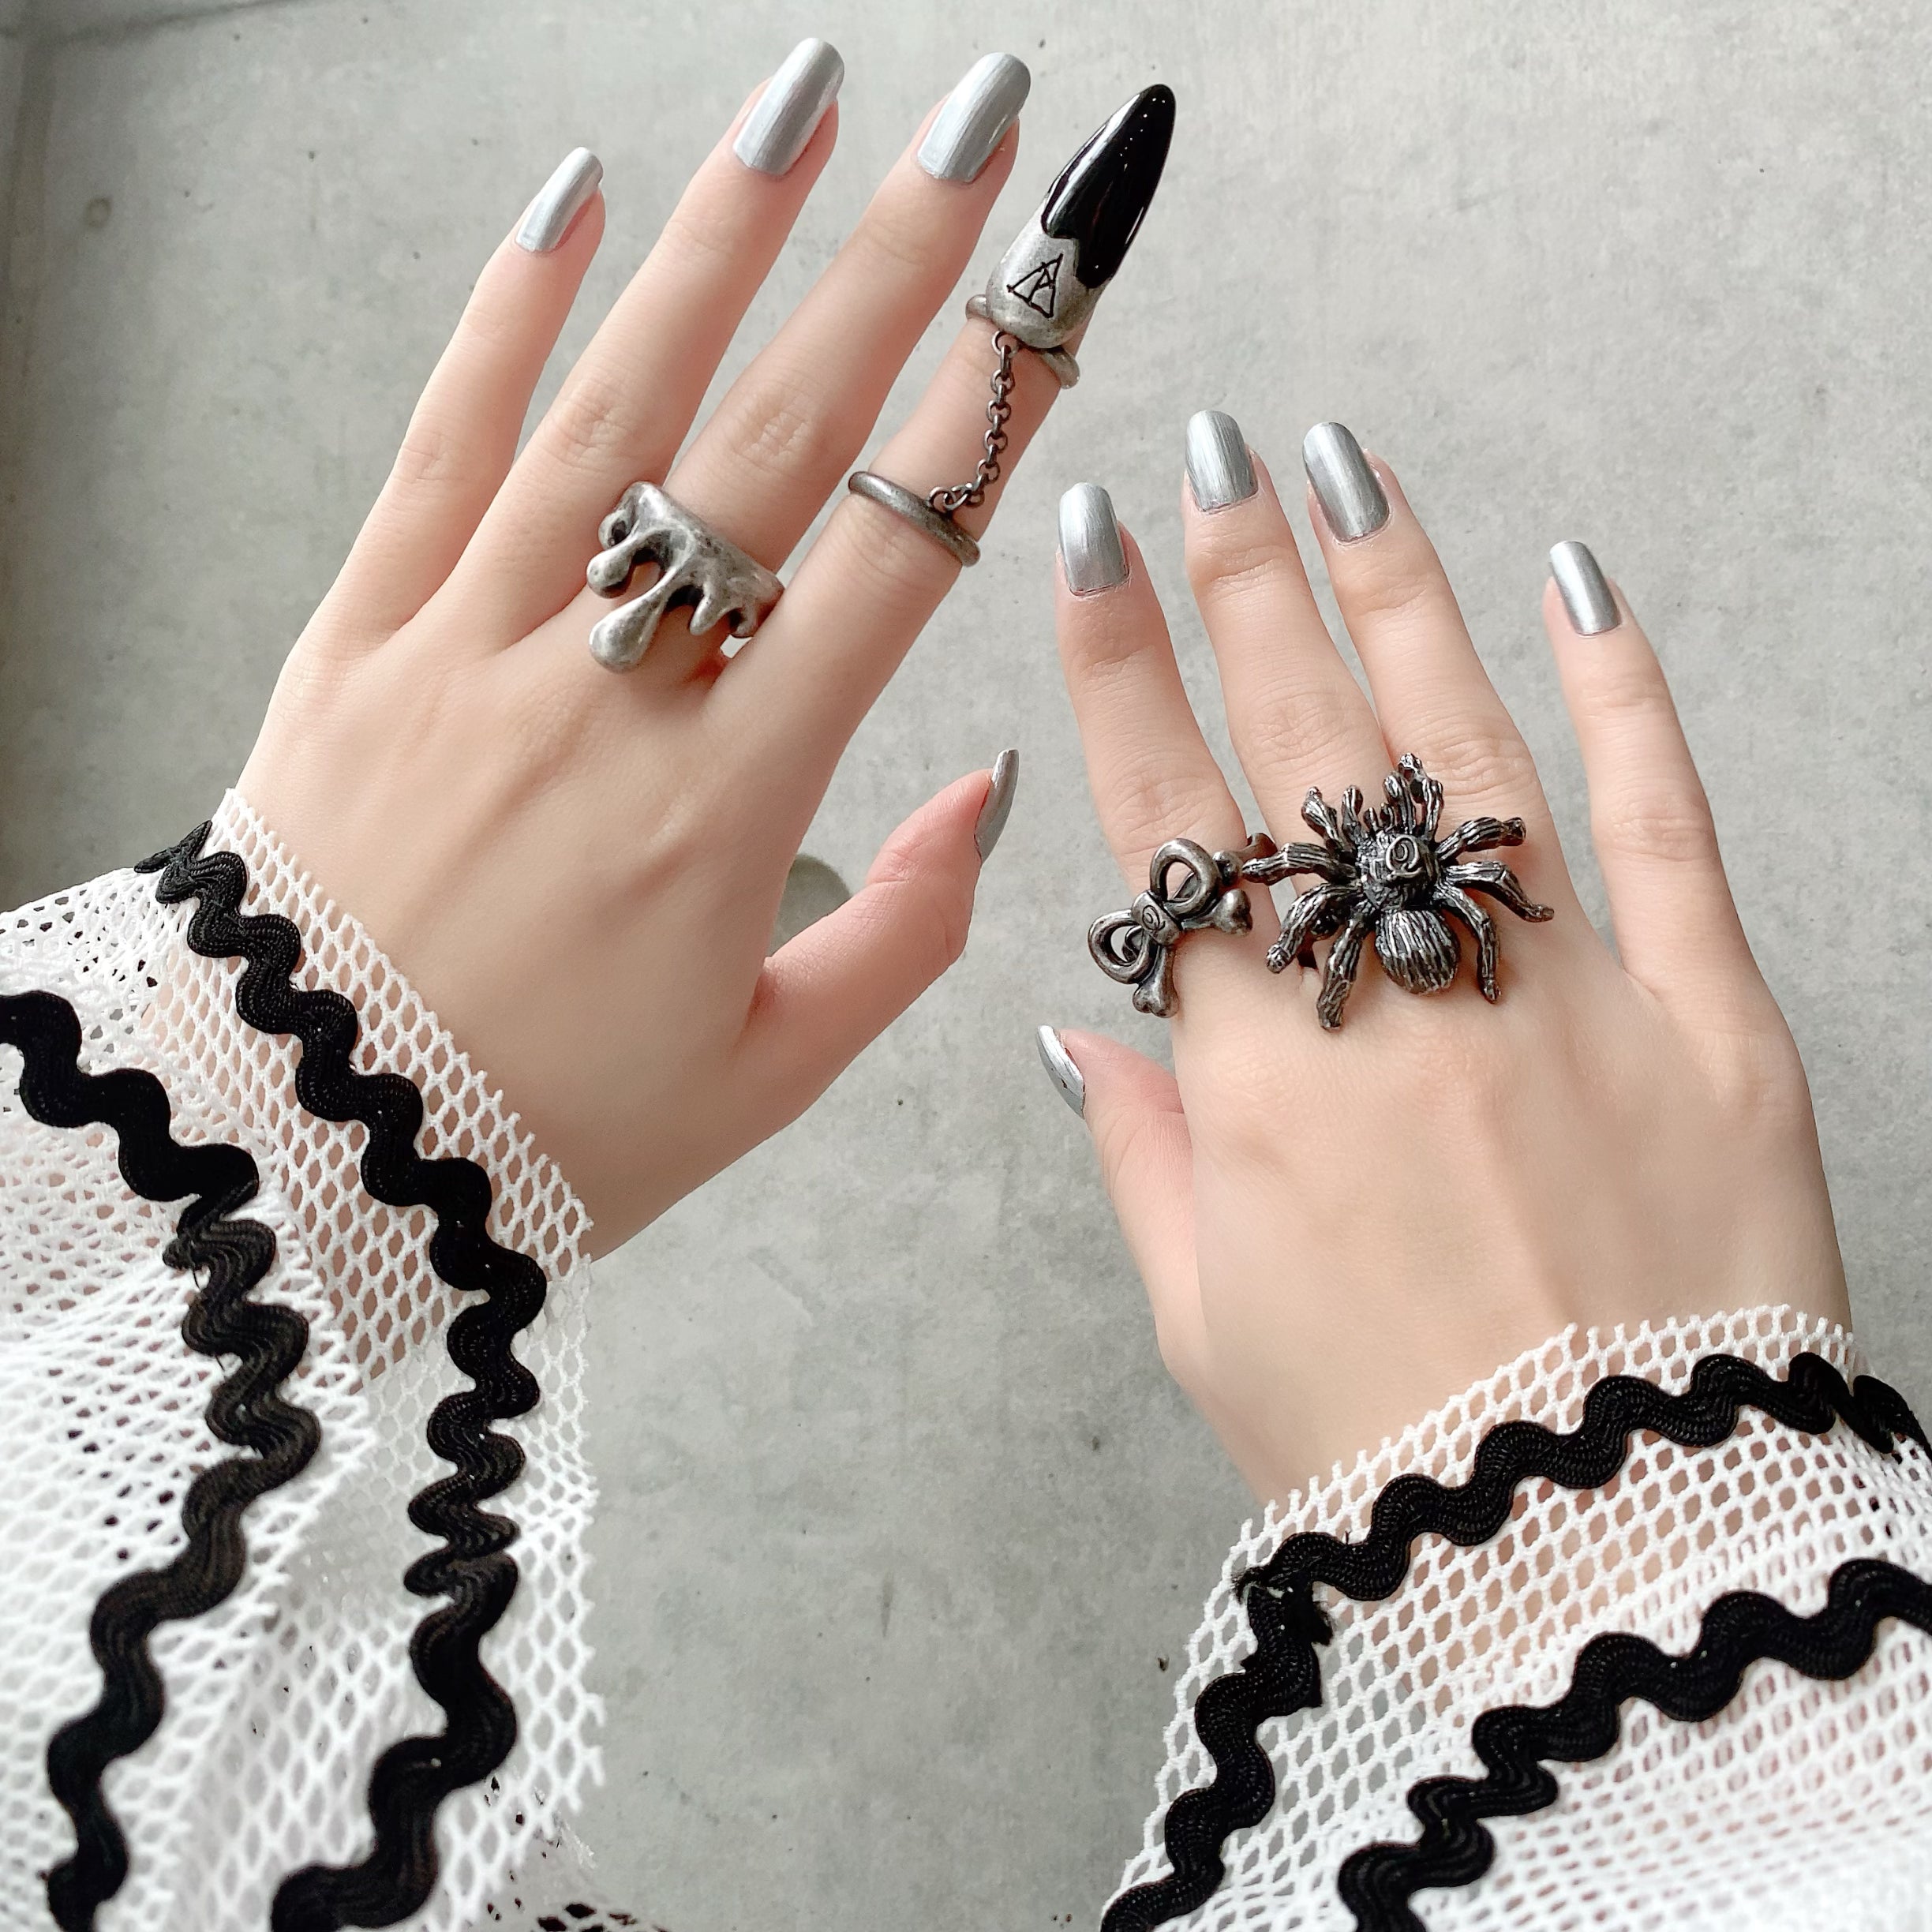 Melt Ring(Antique Silver)【Japan Jewelry】